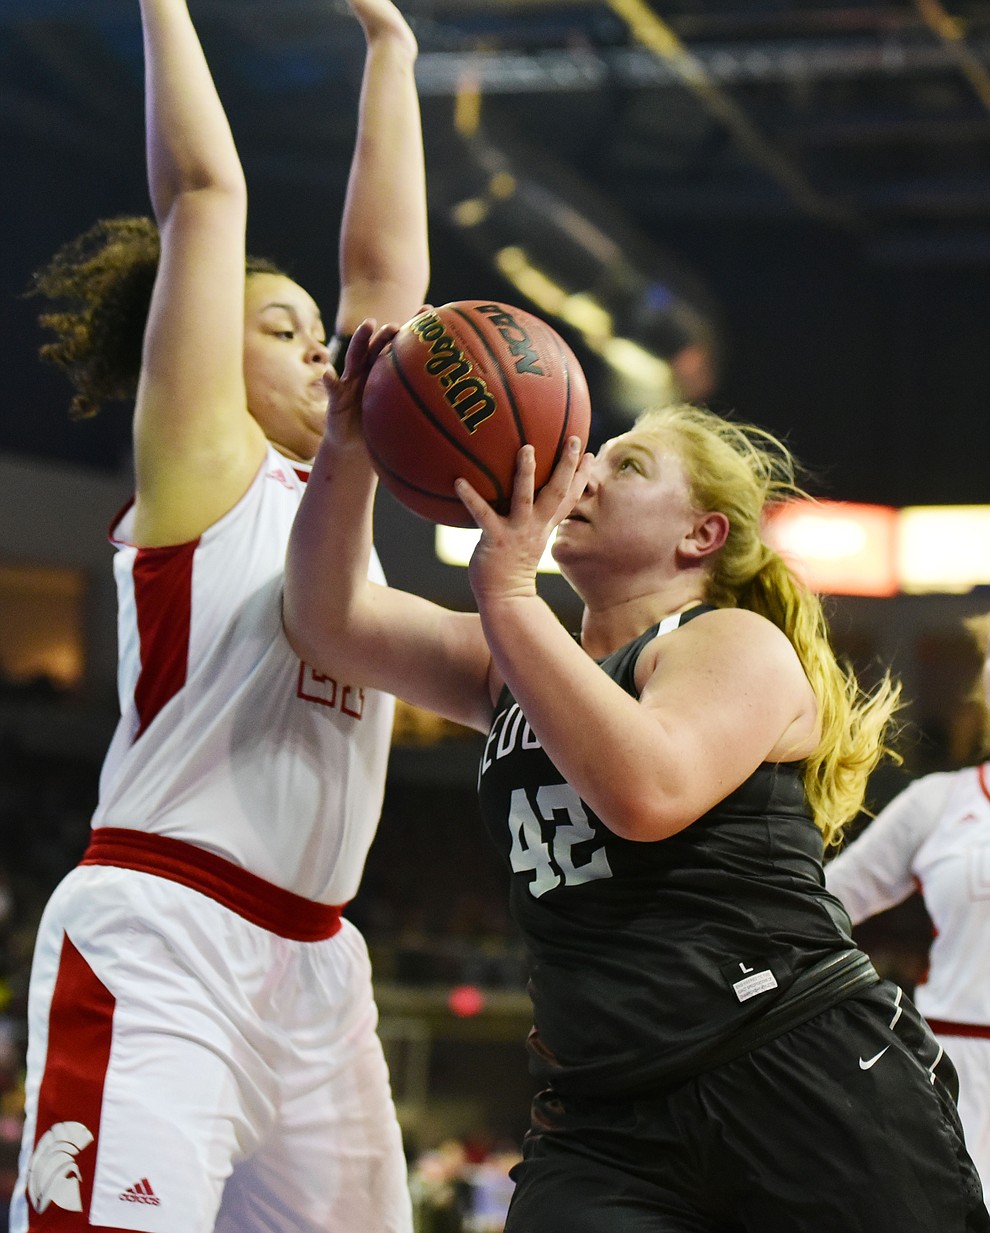 Sedona's Hannah Ringel looks to shoot as the Lady Scorpions take on the Leading Edge Academy Lady Spartans in the AIA Division 2 State Semifinals Friday, February 24 at the Prescott Valley Event Center. (Les Stukenberg/The Daily Courier)